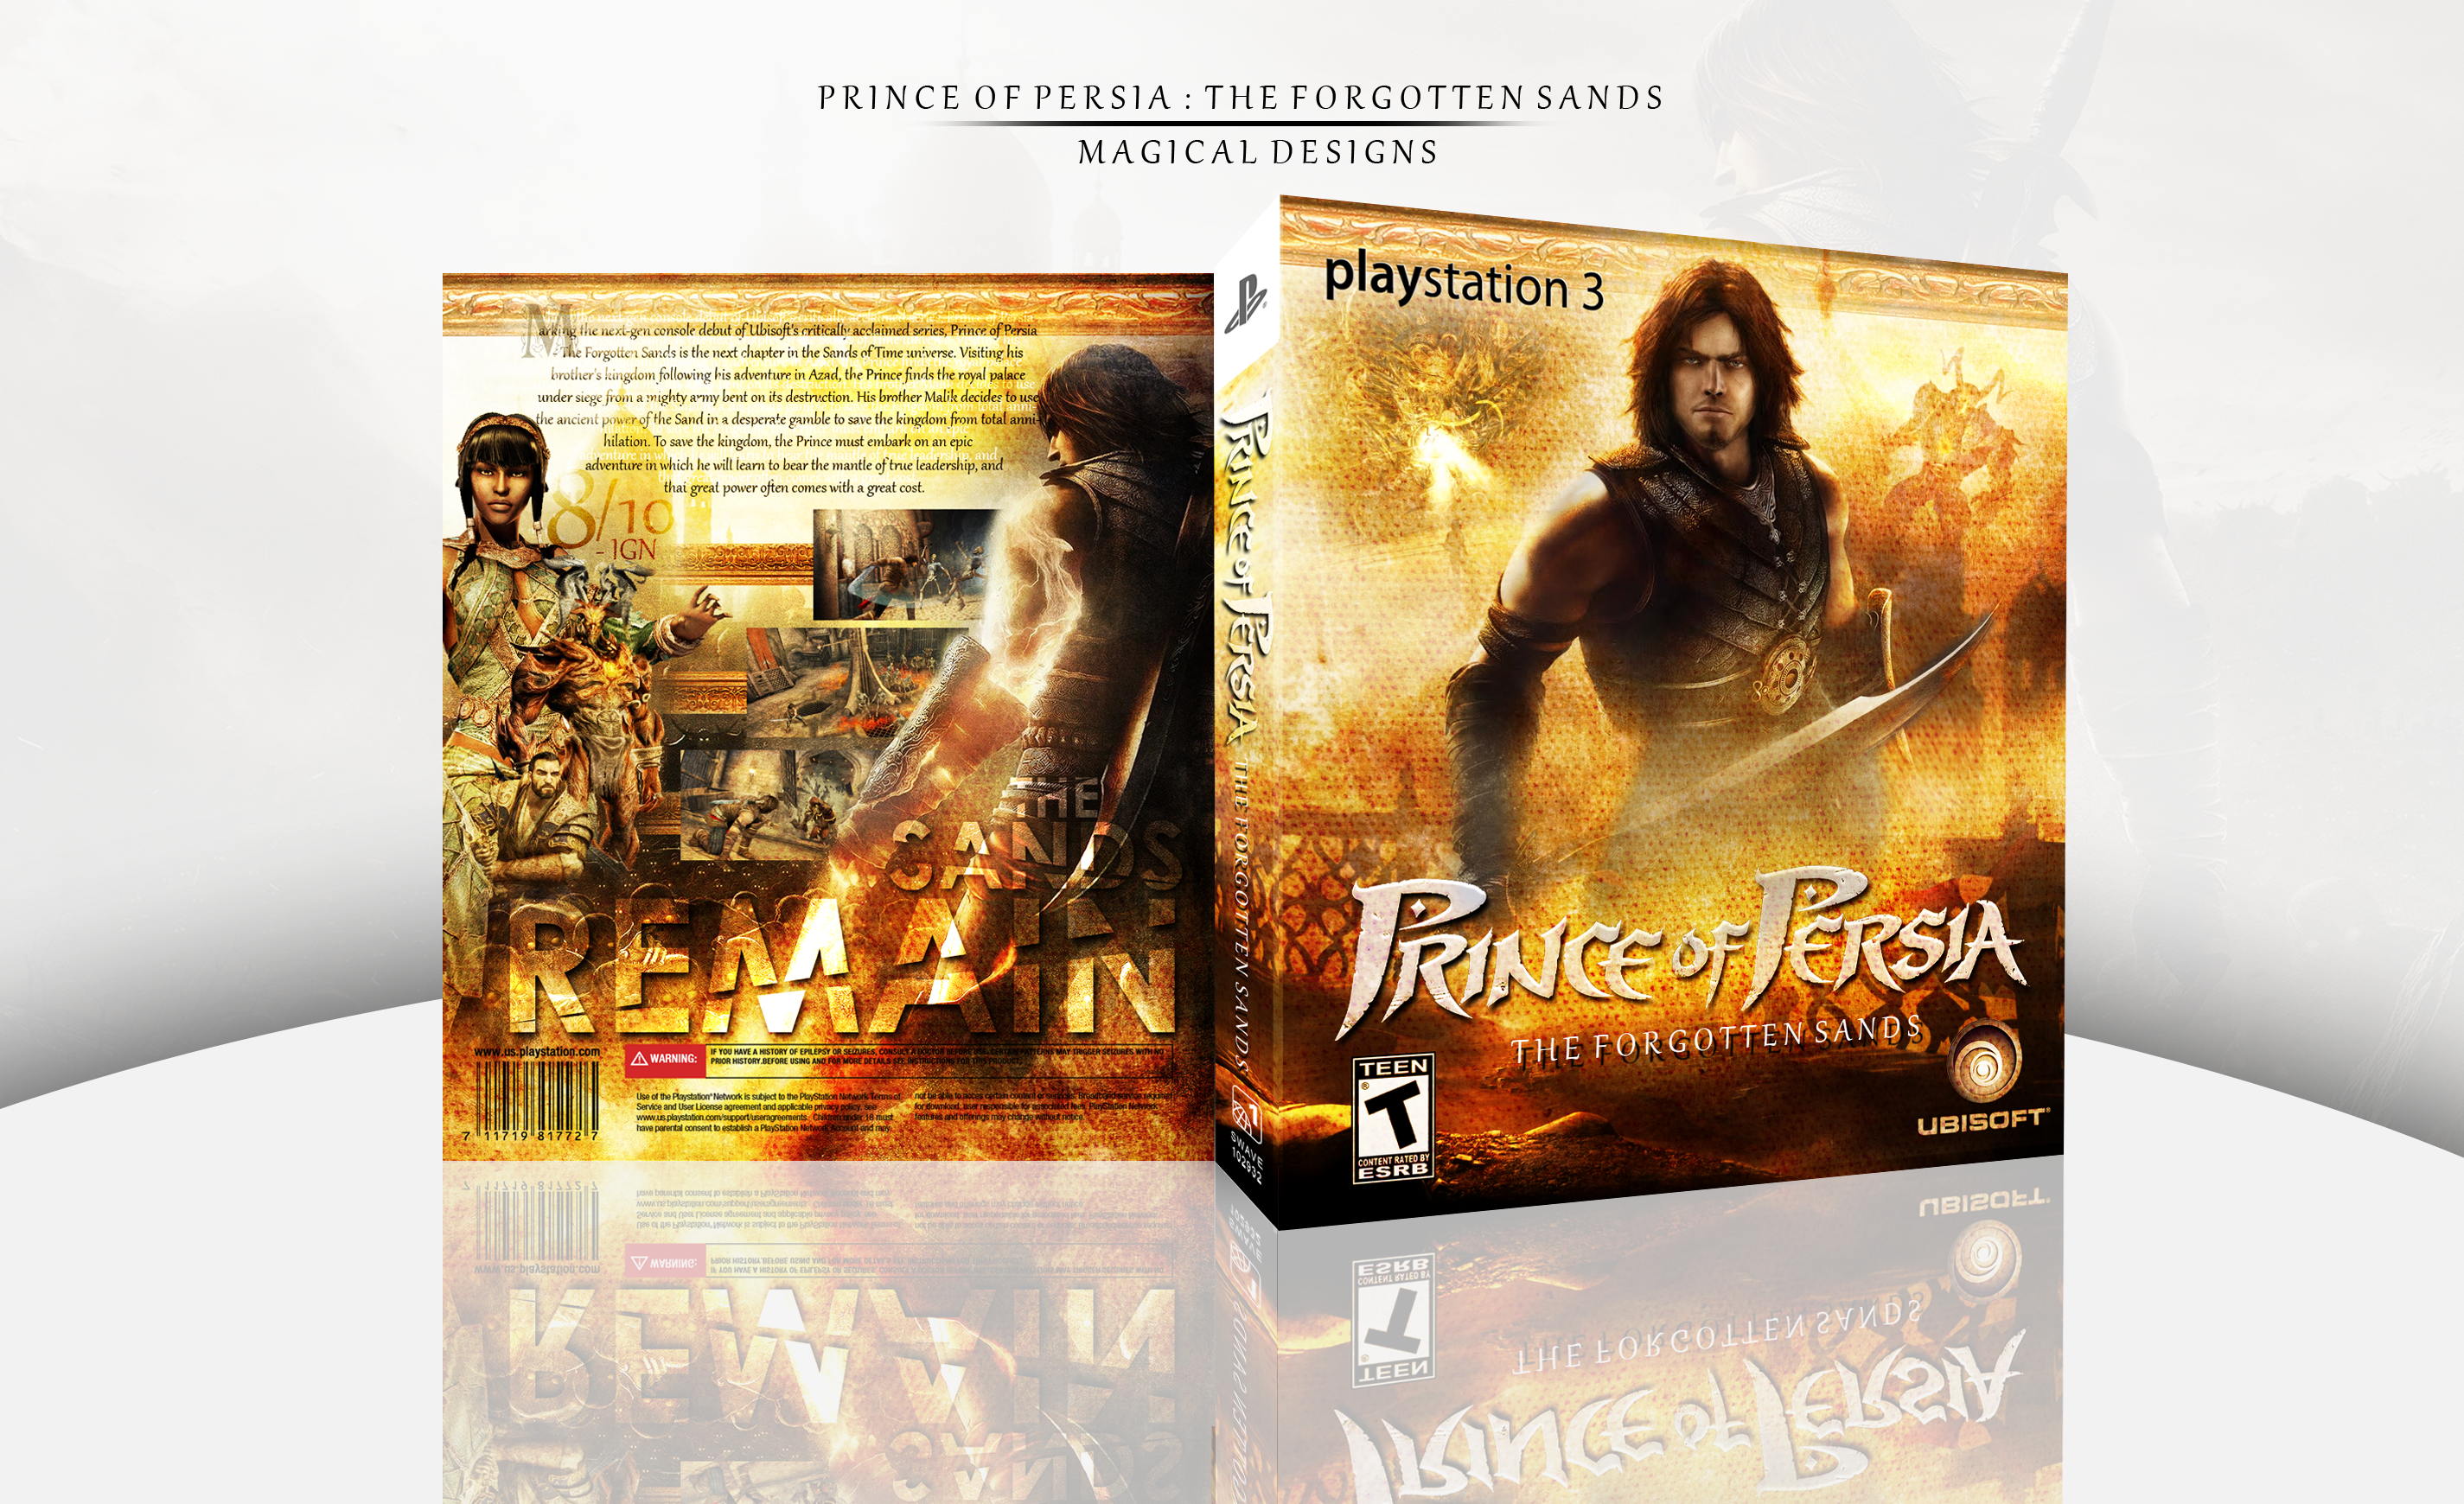 Prince of Persia: The Forgotten Sands box cover